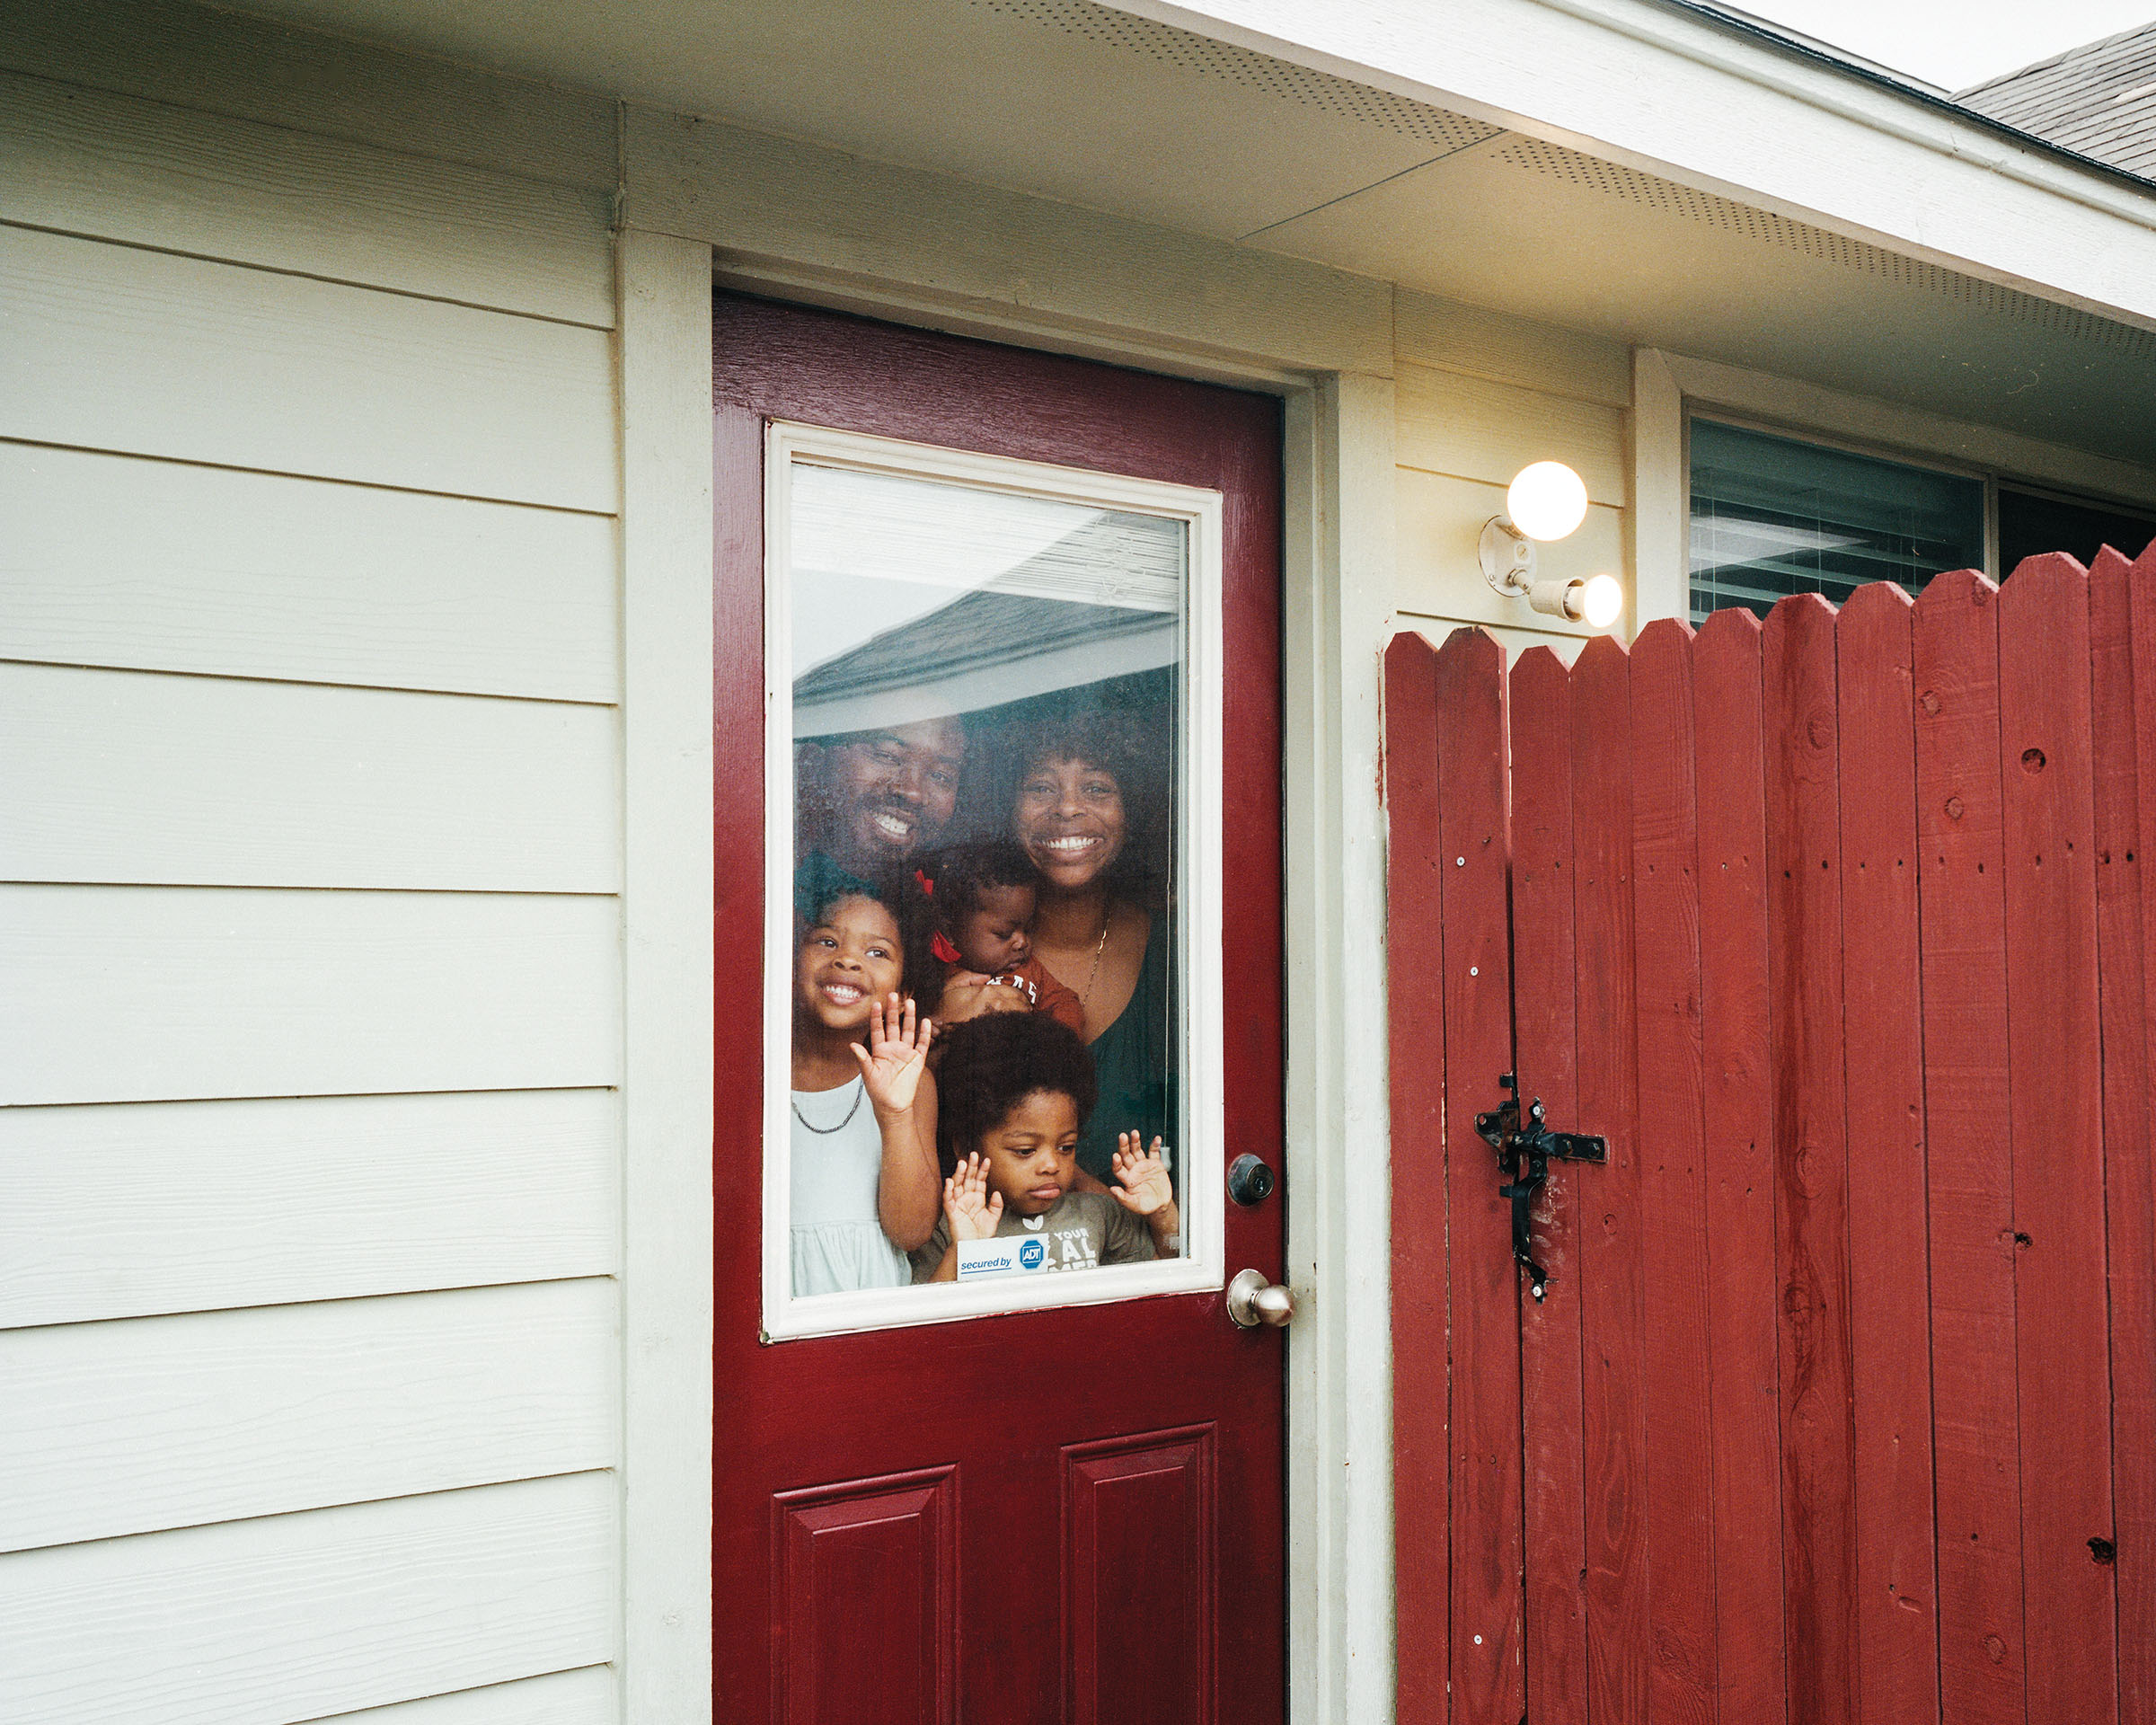 A family looks through the window in a dark red door next to a red fence